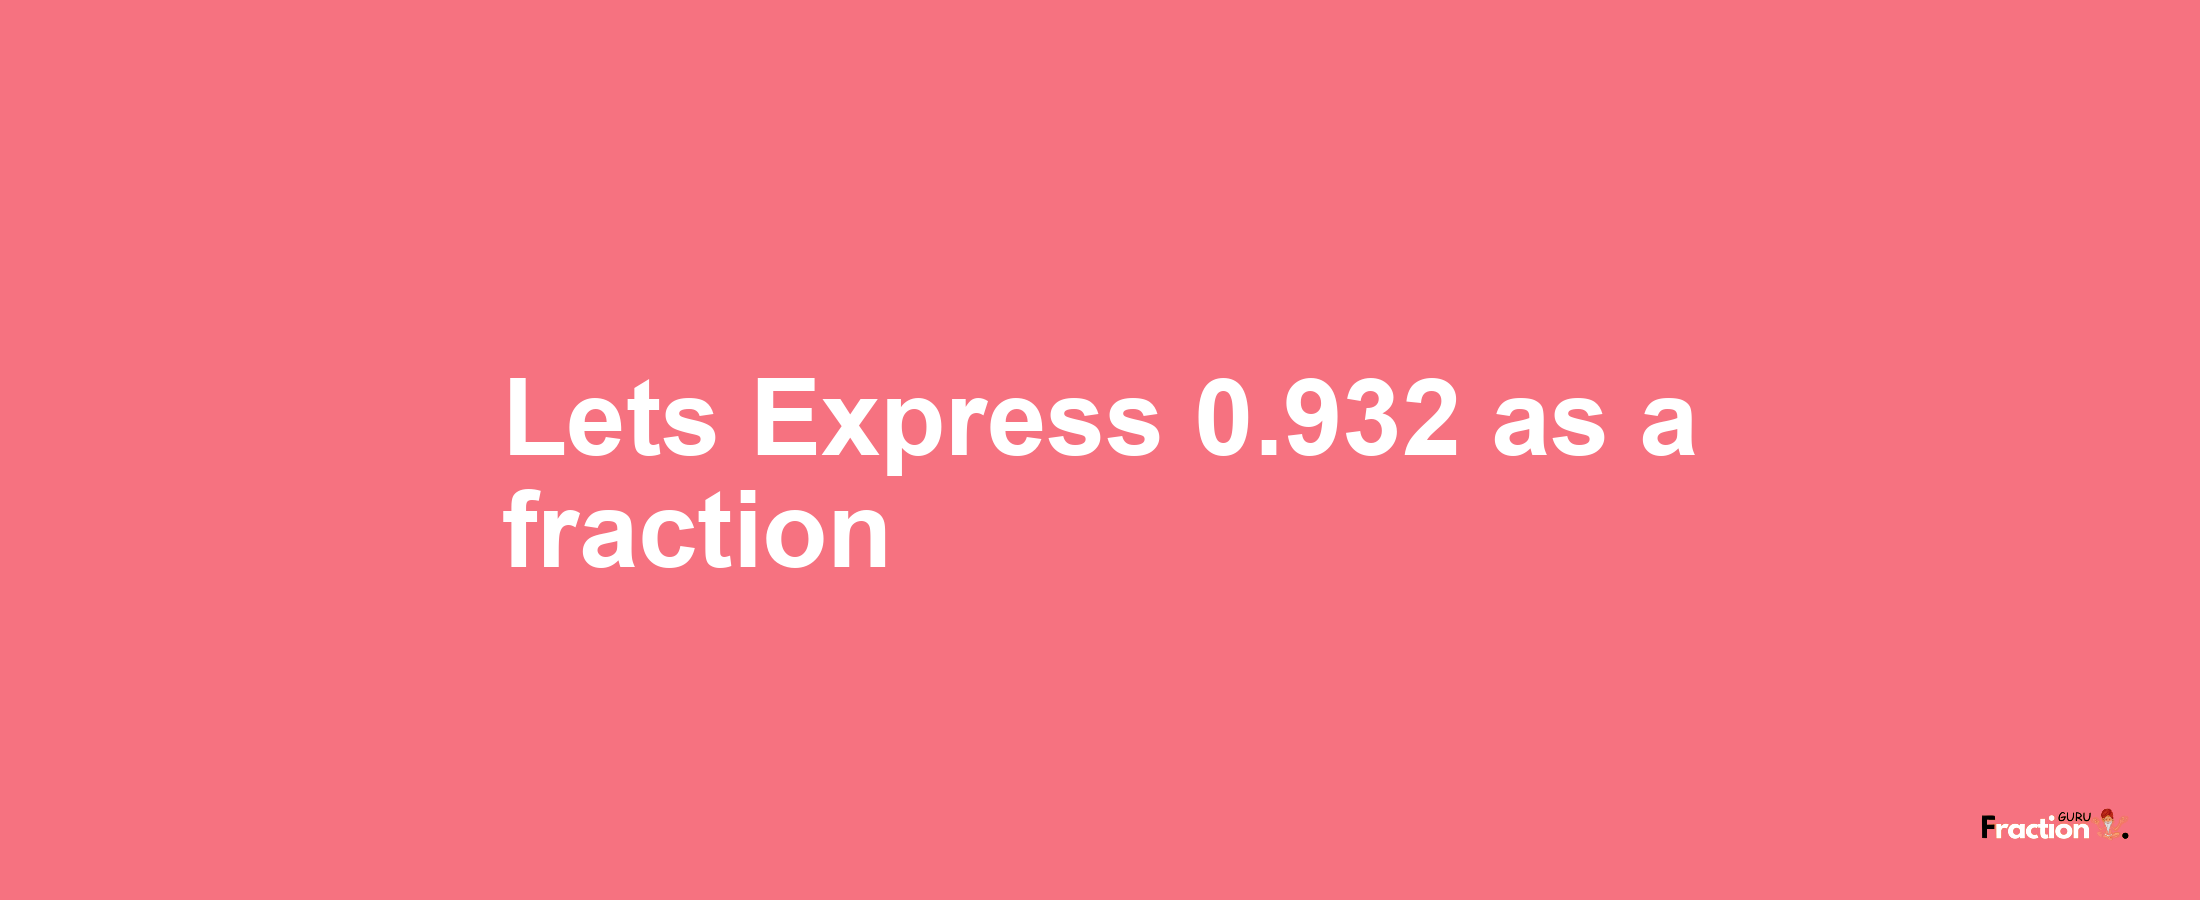 Lets Express 0.932 as afraction